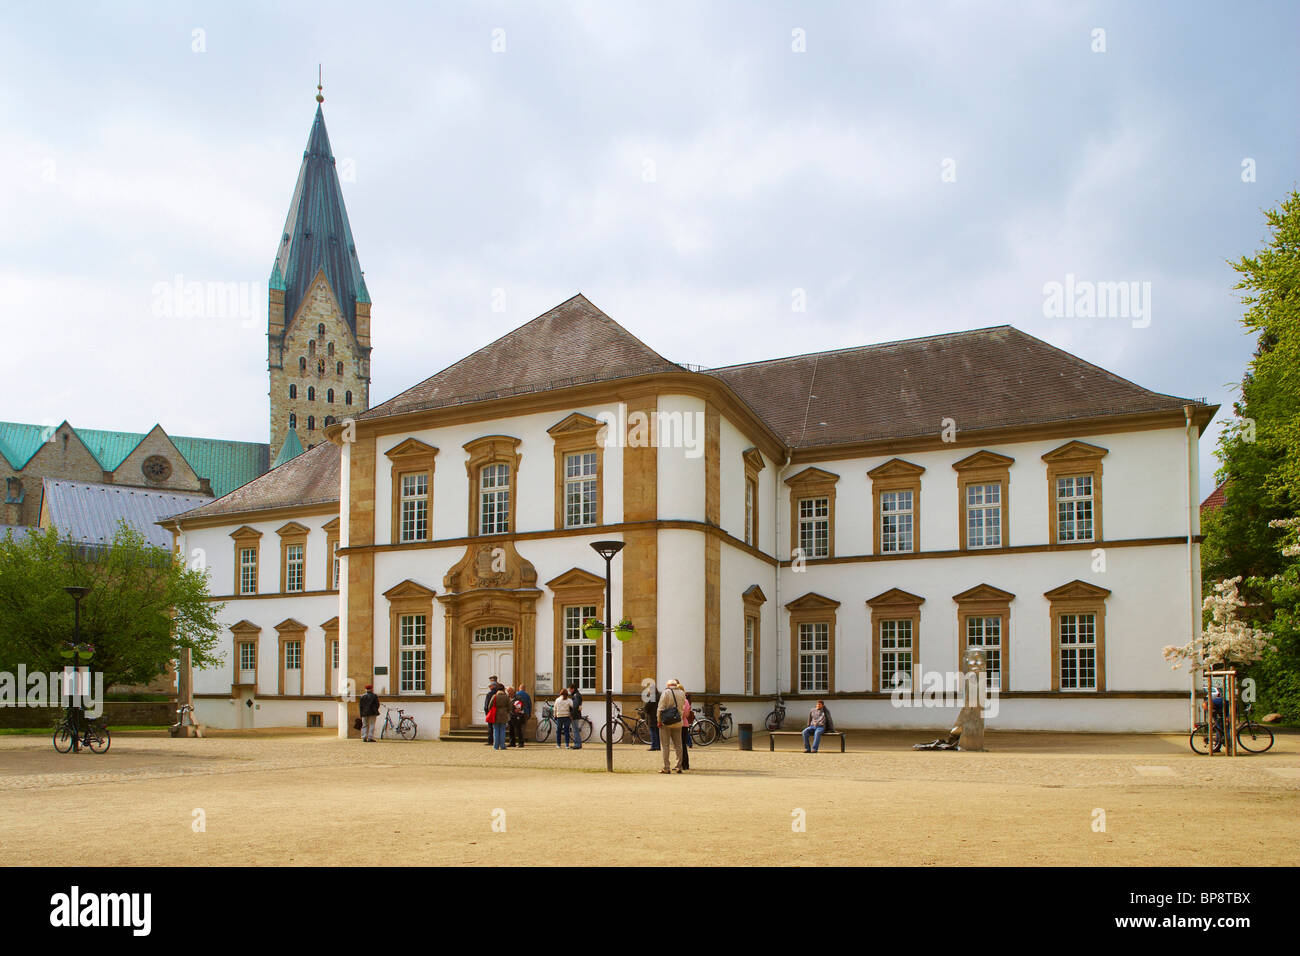 Former Domdechanei (nowadays library) and Cathedral (Dom), Strasse der Weserrenaissance, Paderborn, Teutoburger Wald, Lippe, Nor Stock Photo